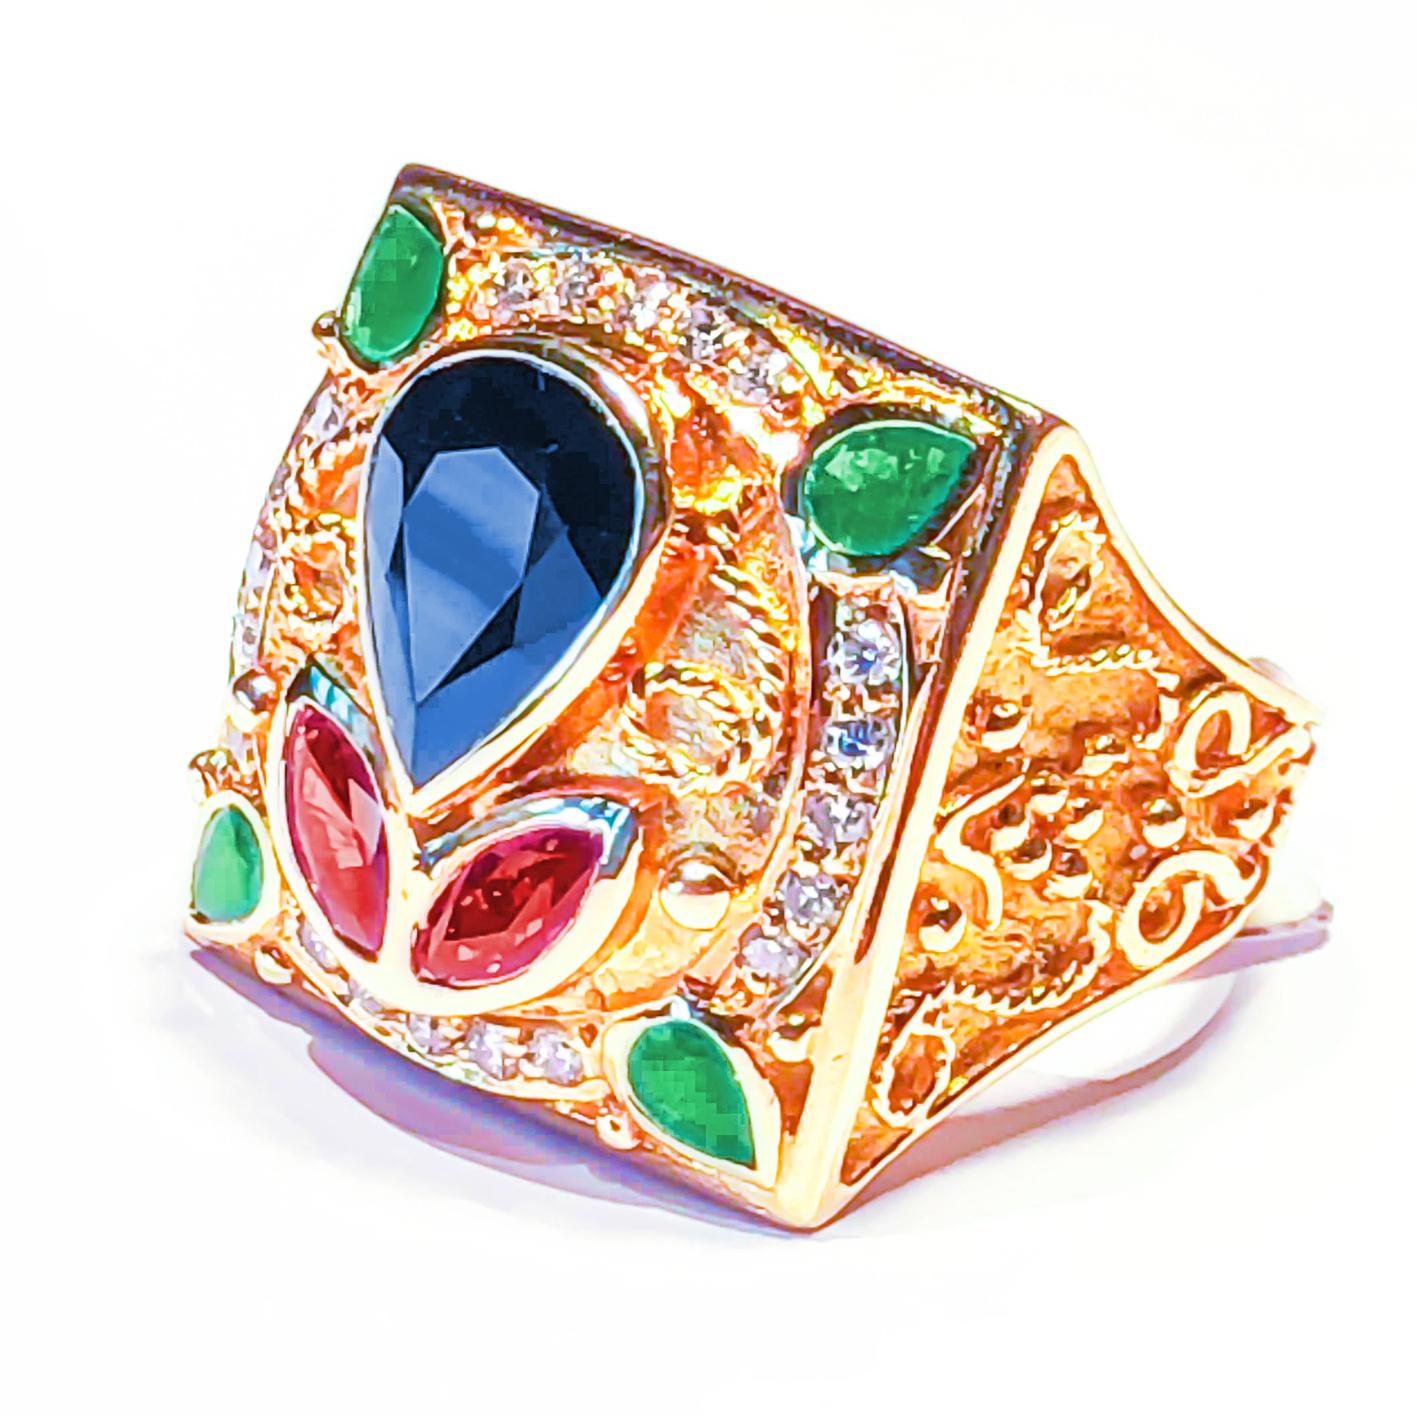 S.Georgios designer Ring is all handmade from solid 18 Karat Yellow Gold and is microscopically decorated with gold wires and beads, Granulated details contrast with Byzantine-style background finish. It features 1 Center pear shape Sapphire total